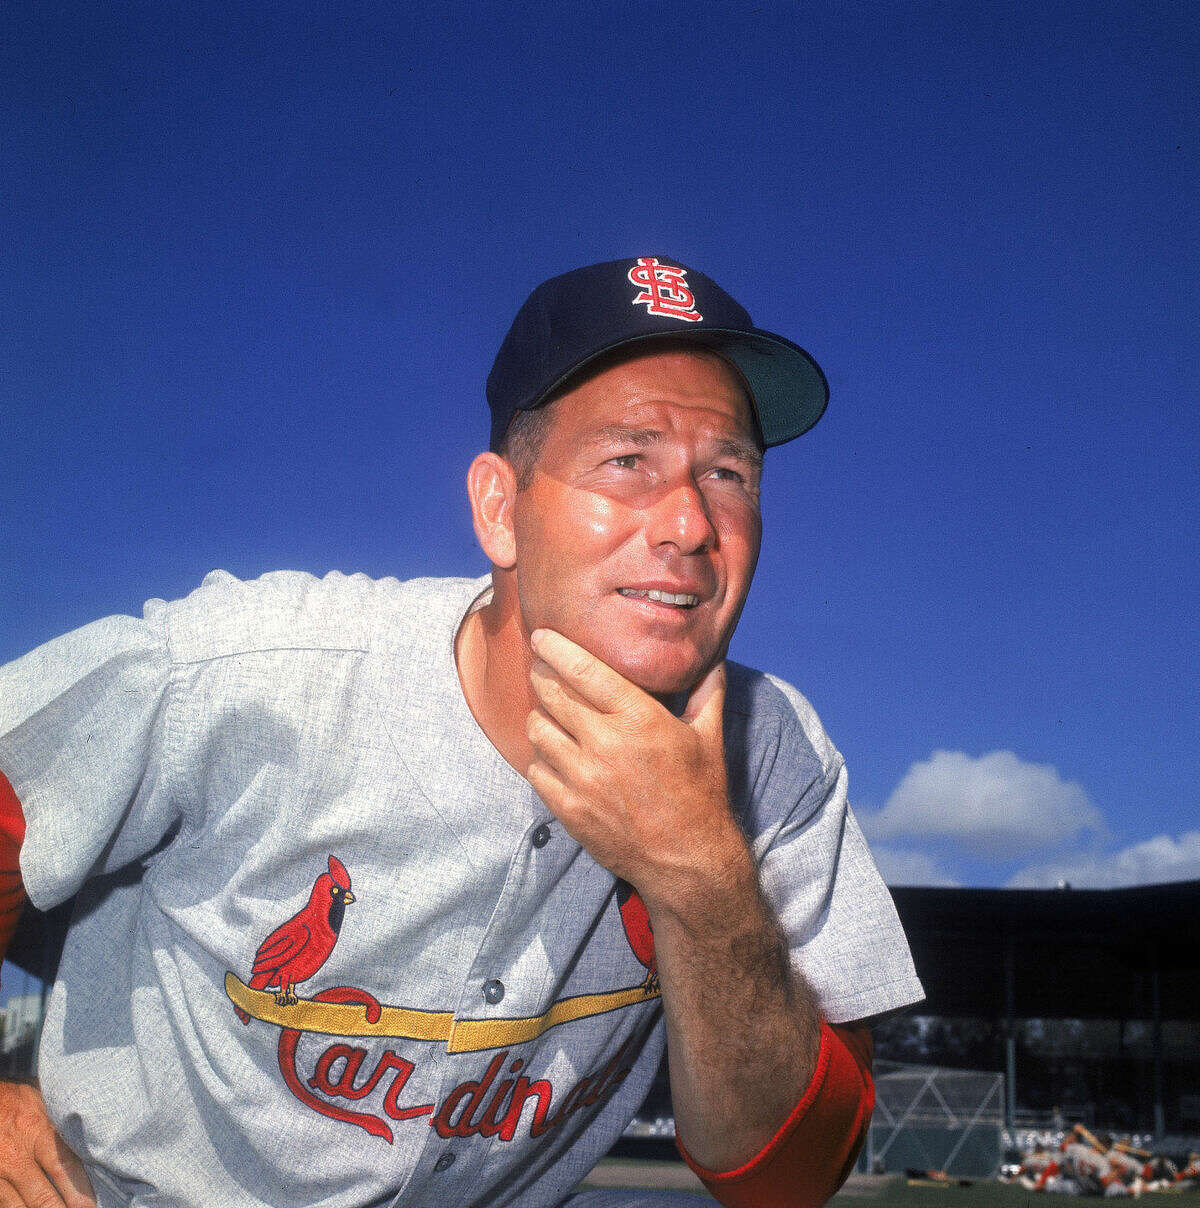 Former Cardinals player and manager Solly Hemus. (Associated Press)